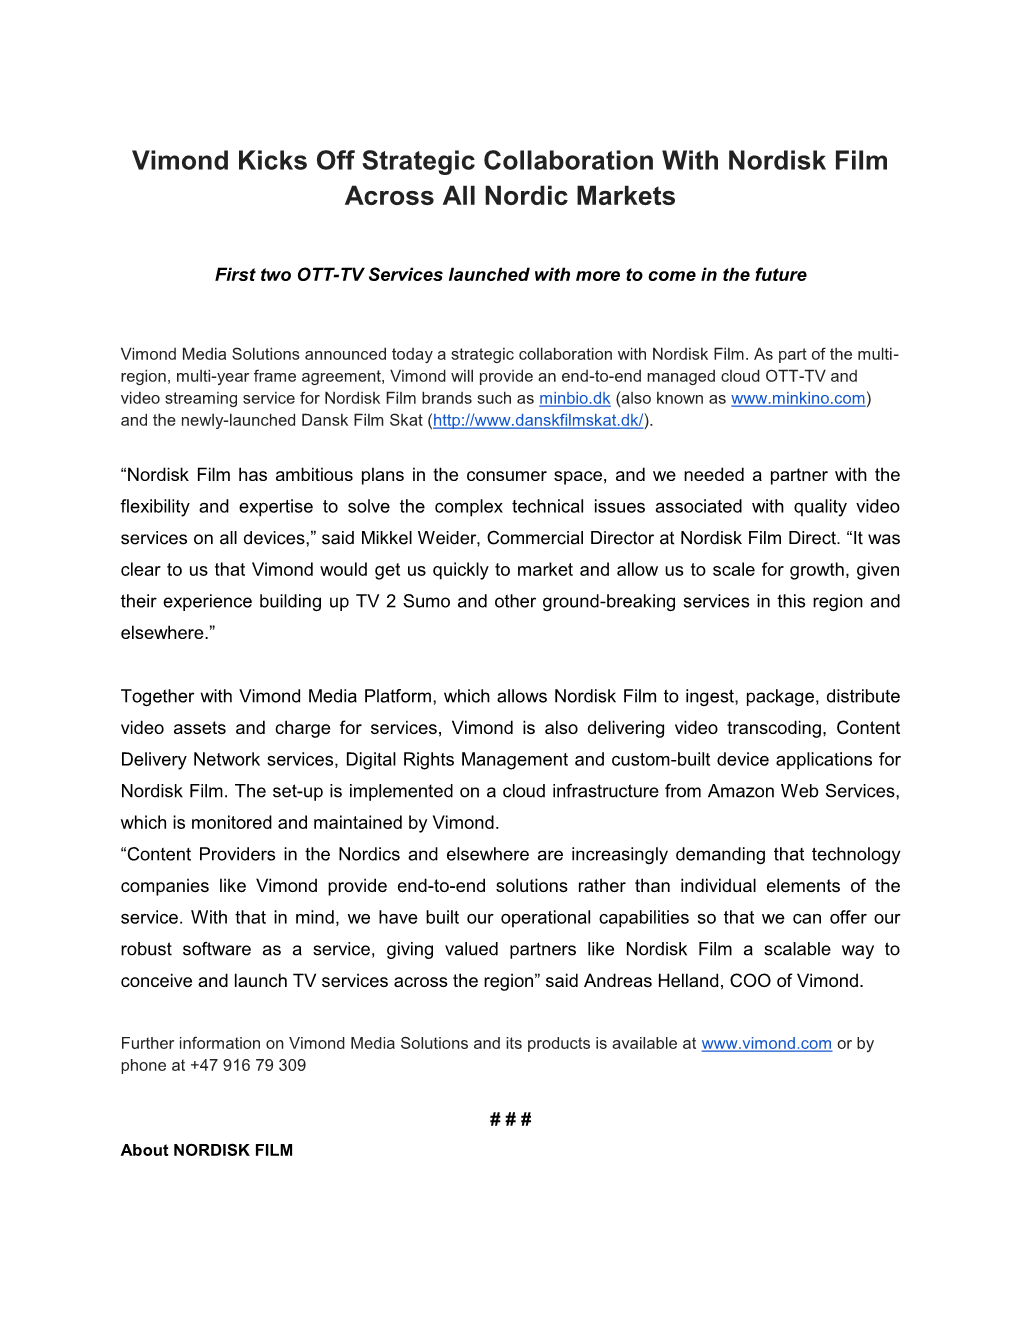 Vimond Kicks Off Strategic Collaboration with Nordisk Film Across All Nordic Markets